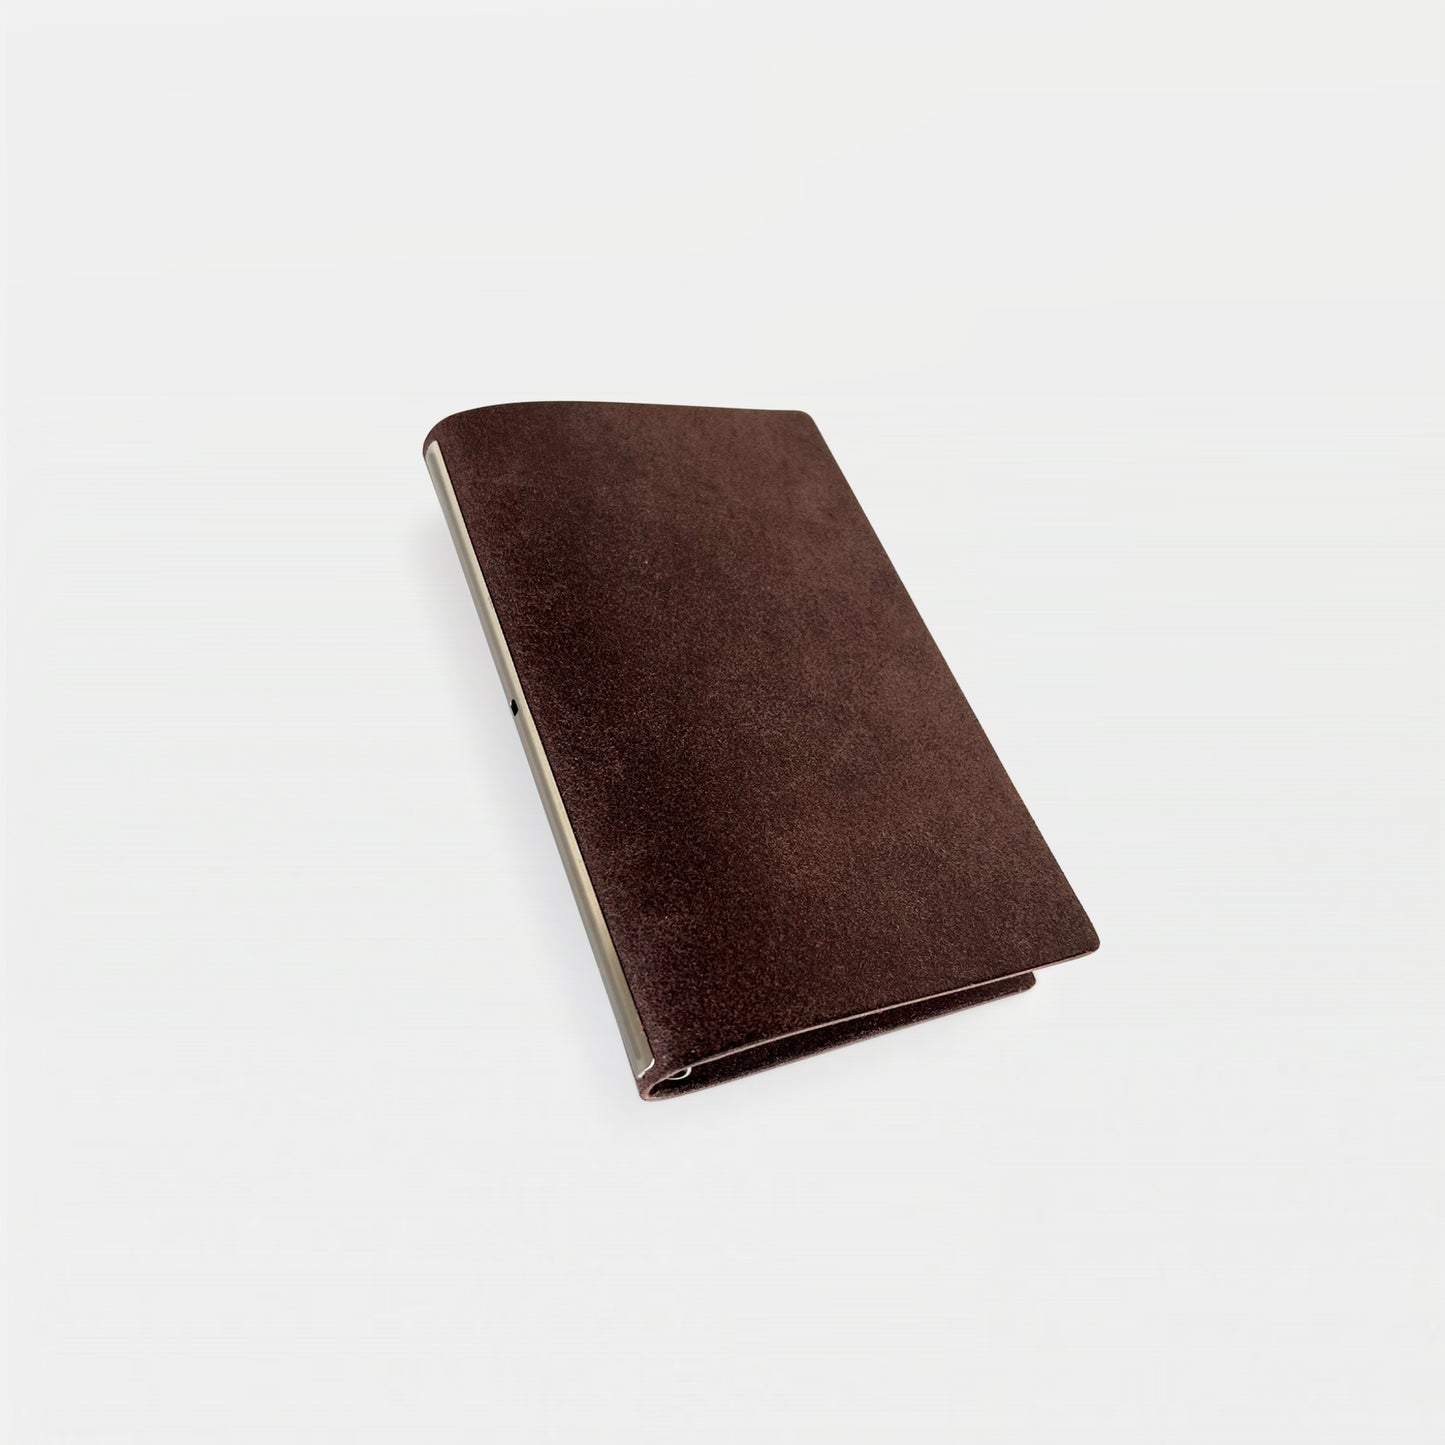 BINDER COVER / plyleather